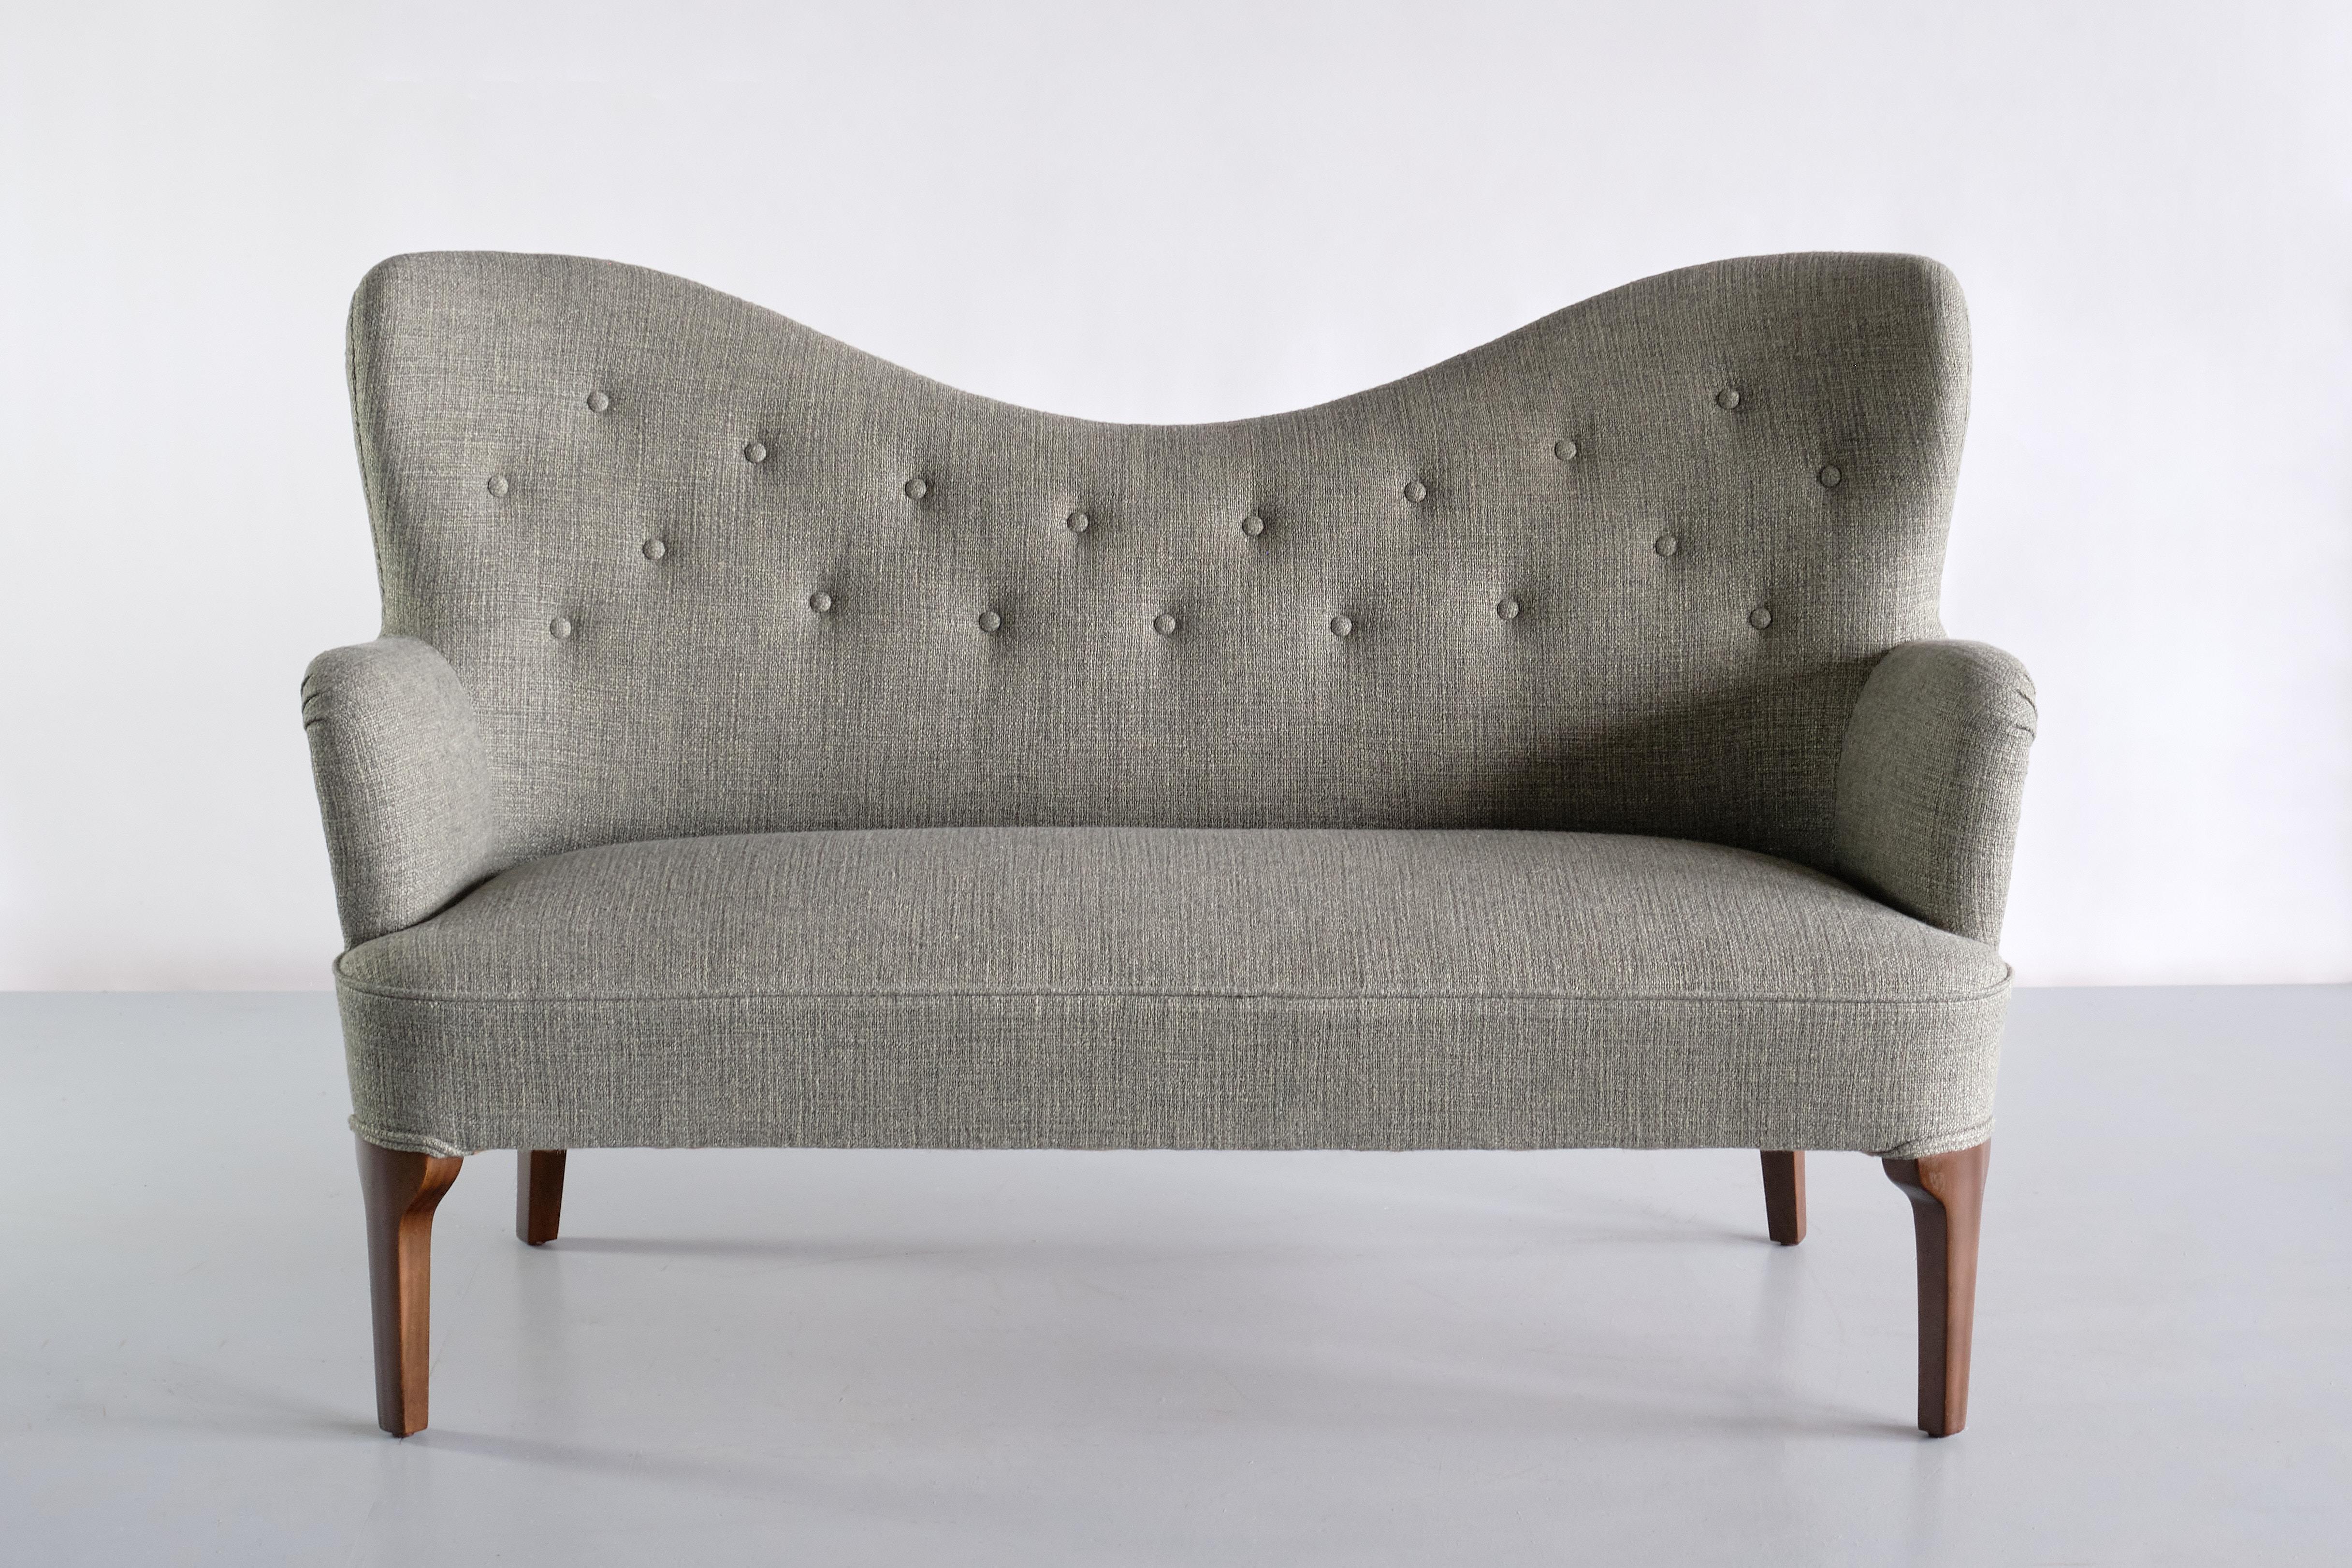 This exceptionally rare two seat sofa was designed by Ernst Kühn for the Wivex restaurant in Copenhagen in the early 1930s. The custom design was most likely produced by the Danish company Normina A/S, the manufacturer Kühn chose to execute most of